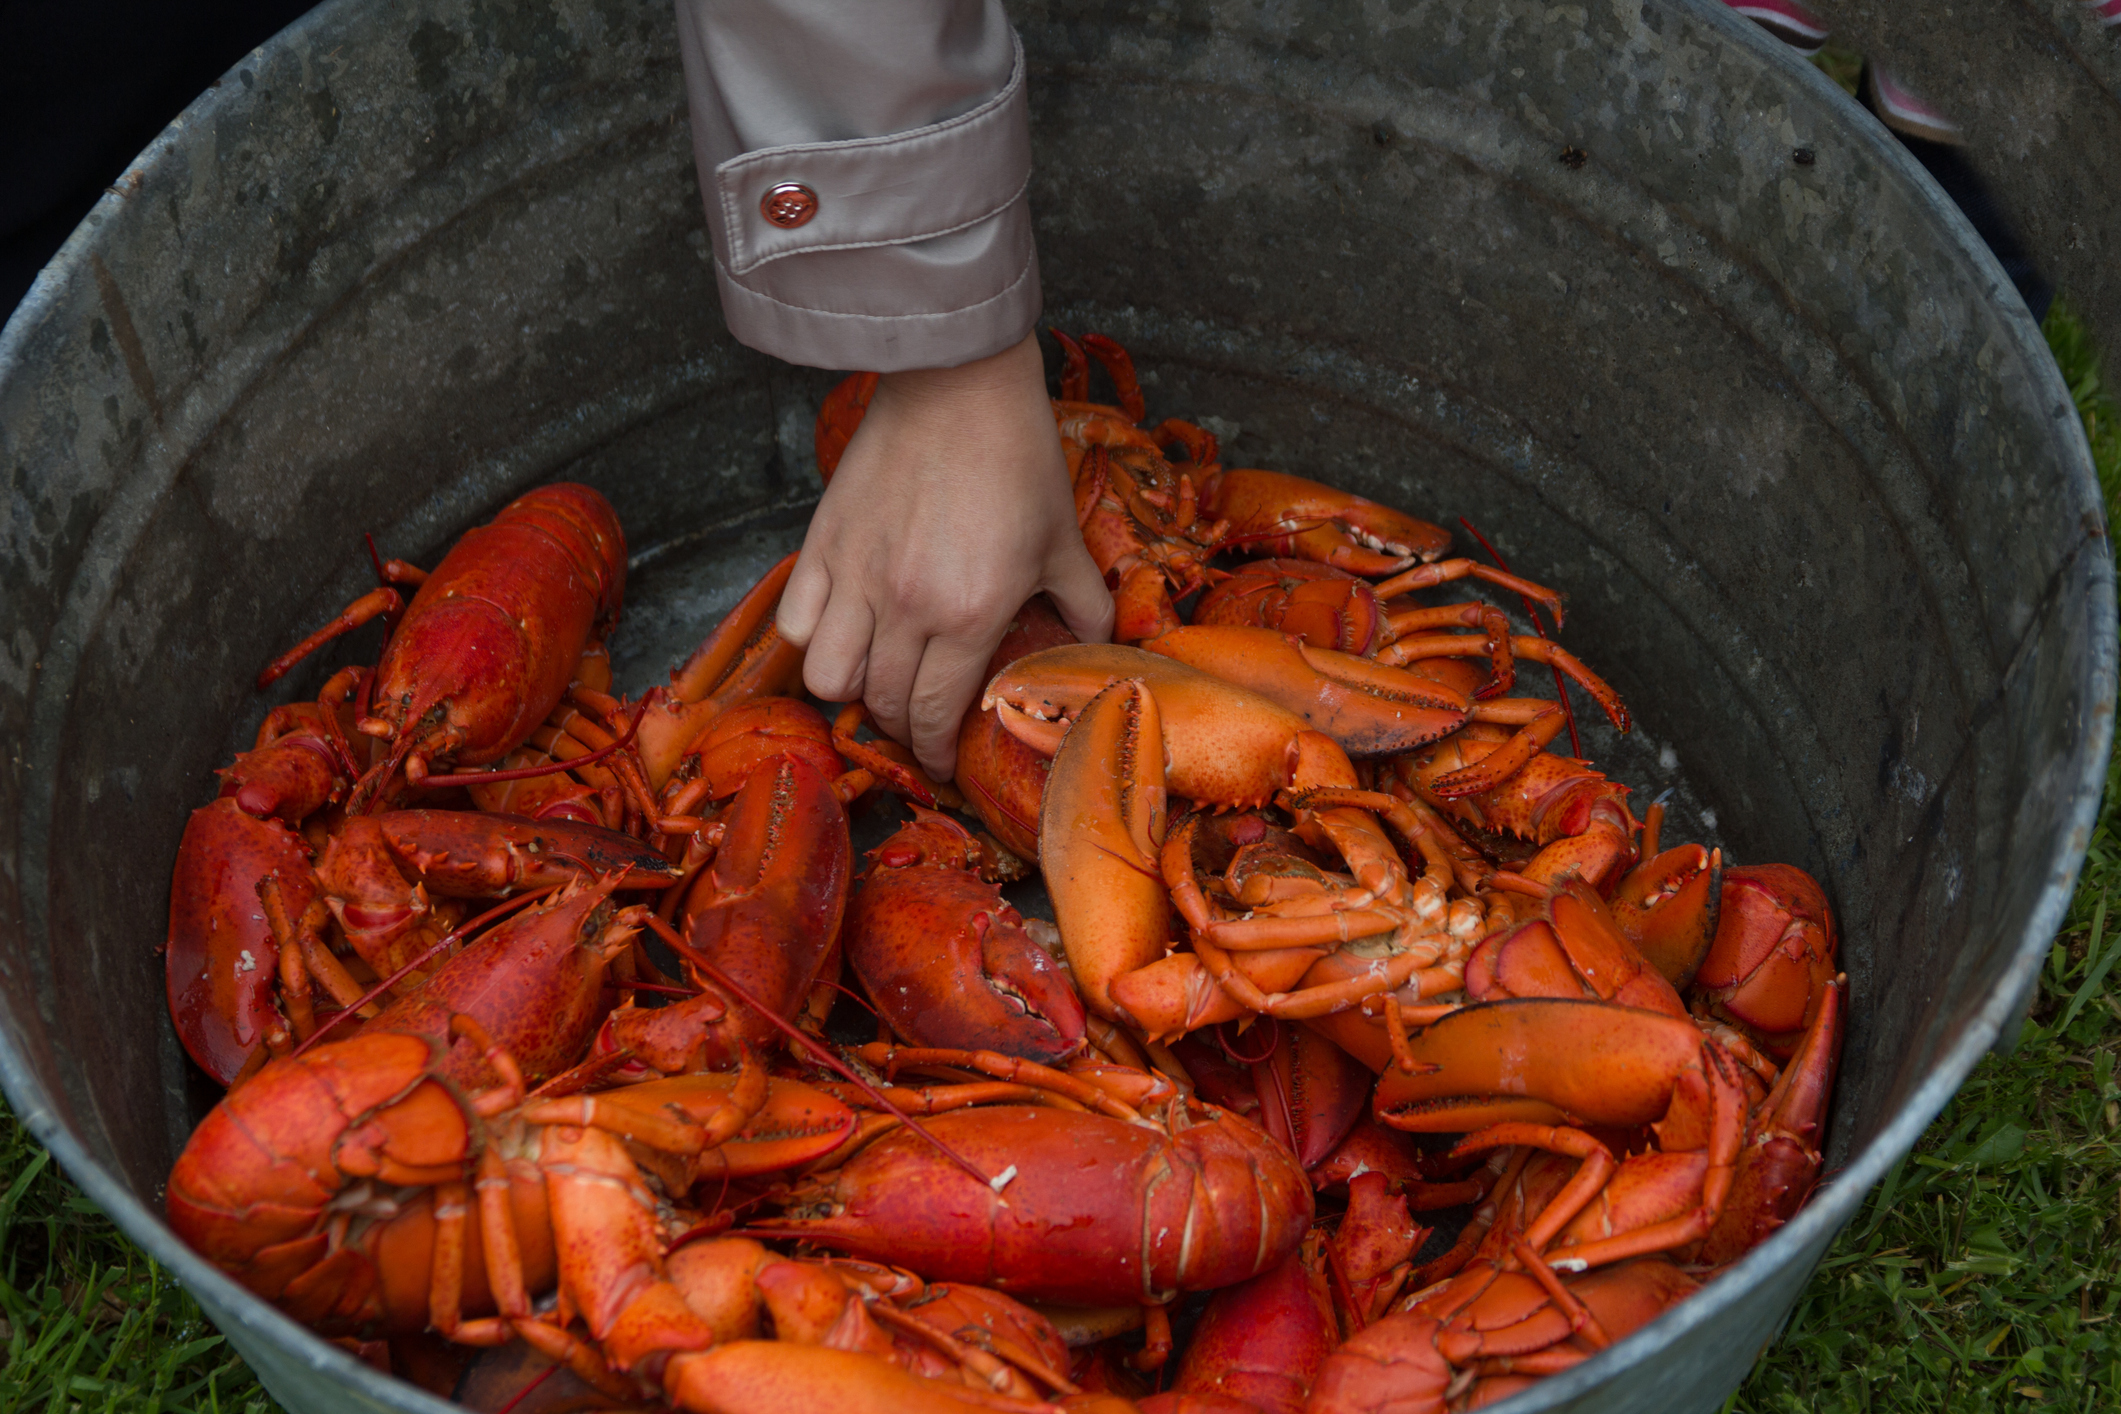 Hand reaching into a bucket of cooked lobster